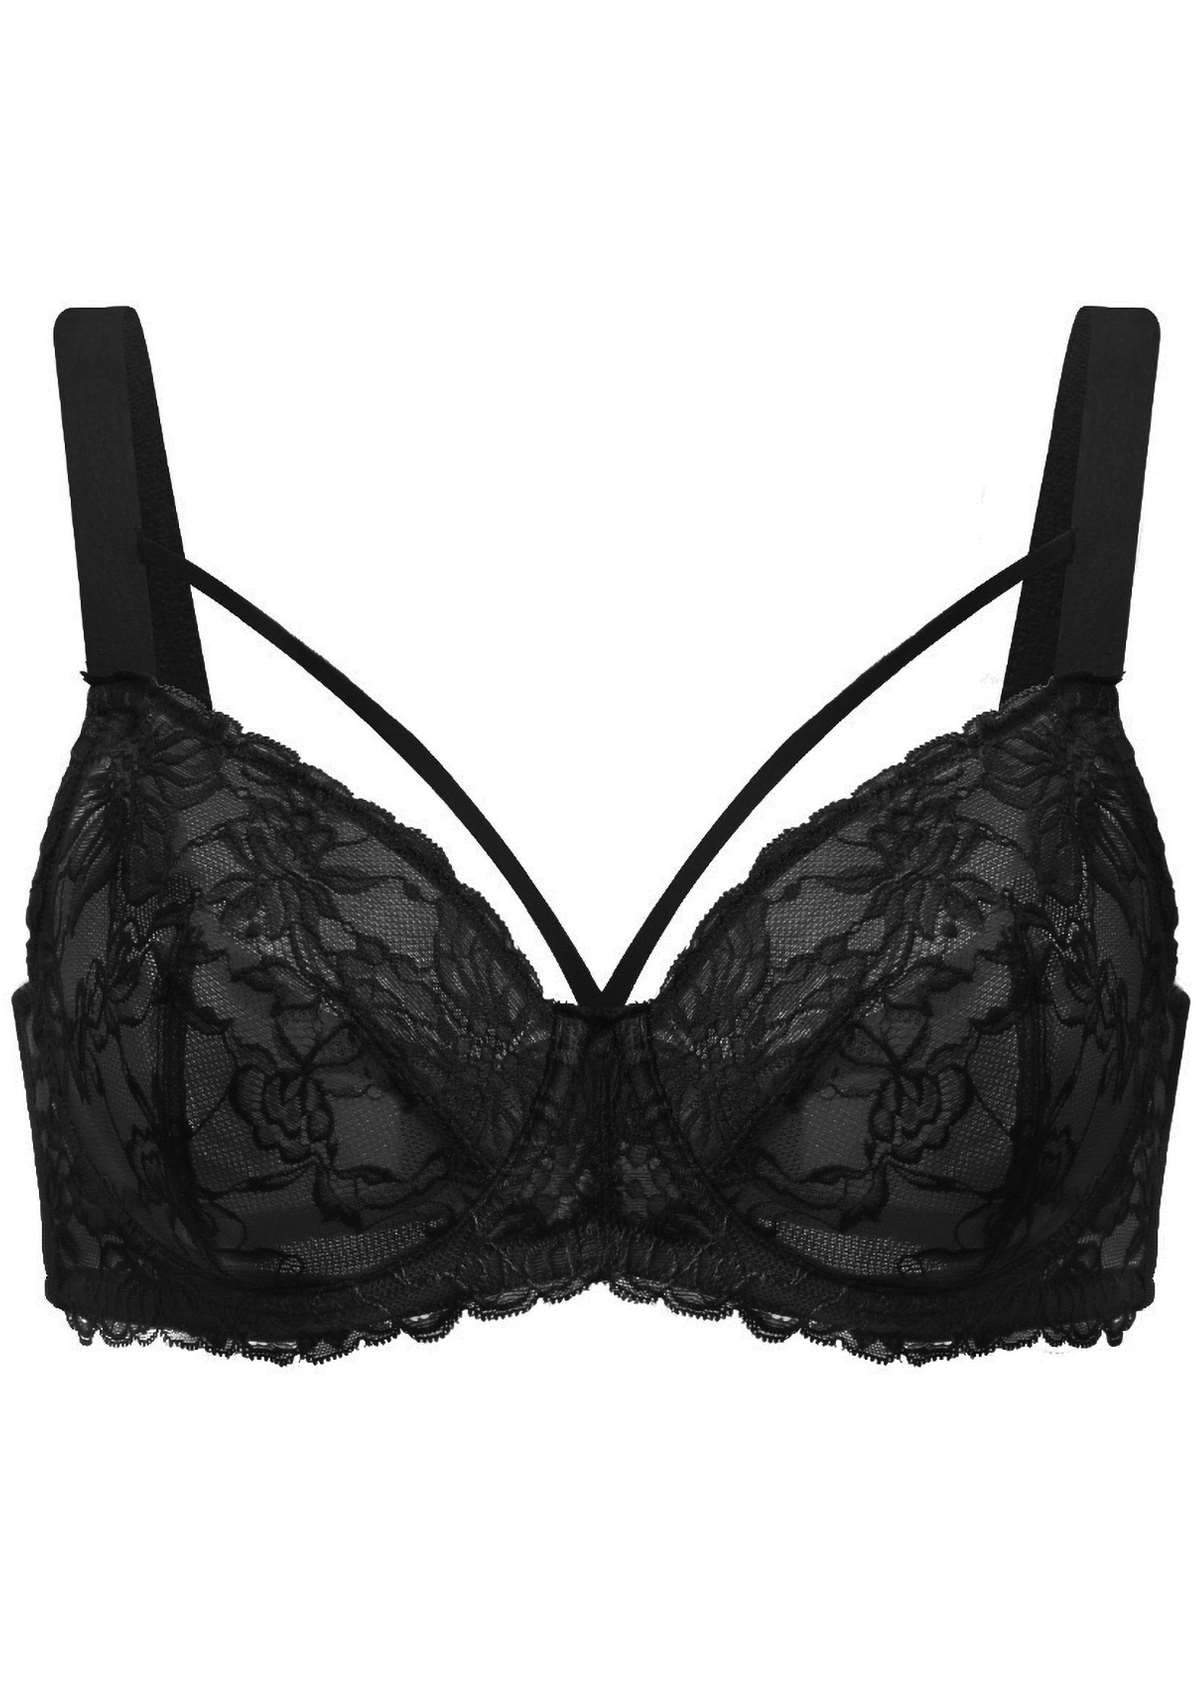 HSIA Pretty In Petals Bra - Plus Size Lingerie For Comfrot And Support - Black / 40 / D